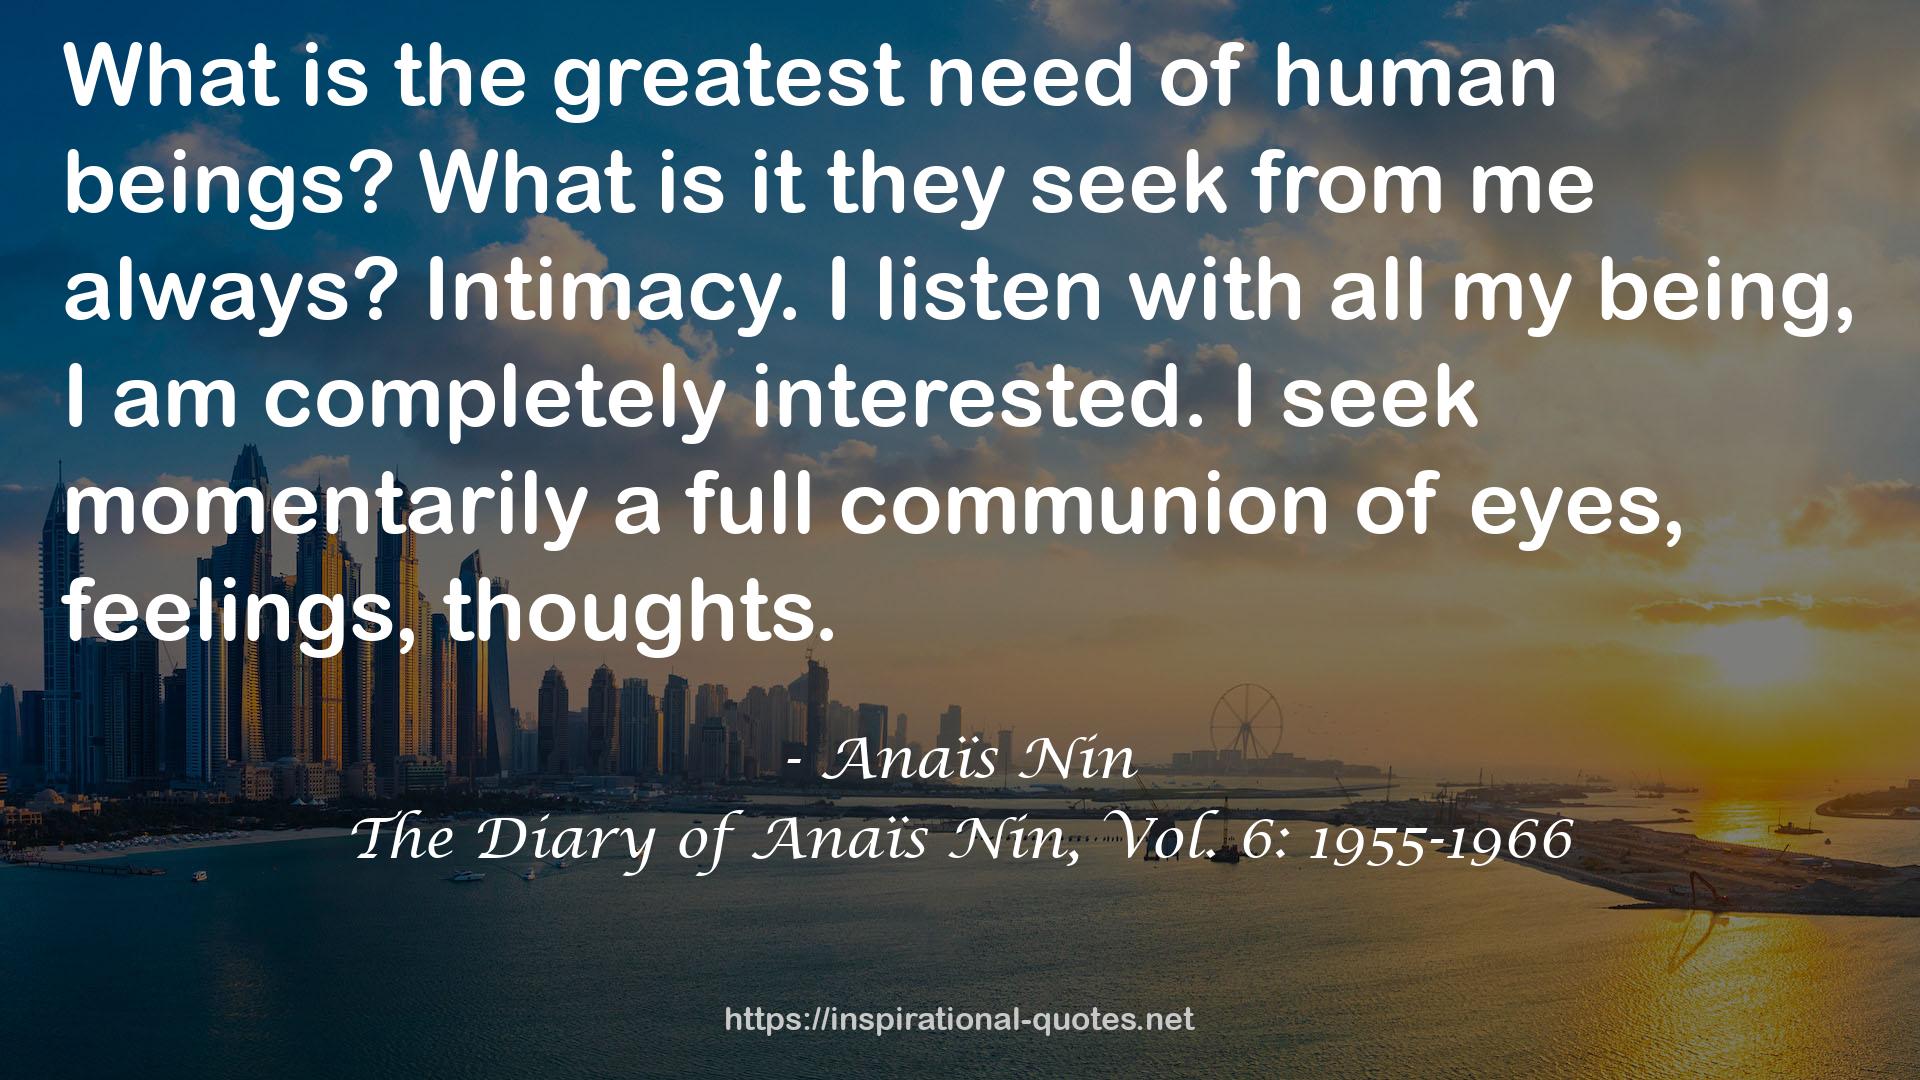 The Diary of Anaïs Nin, Vol. 6: 1955-1966 QUOTES